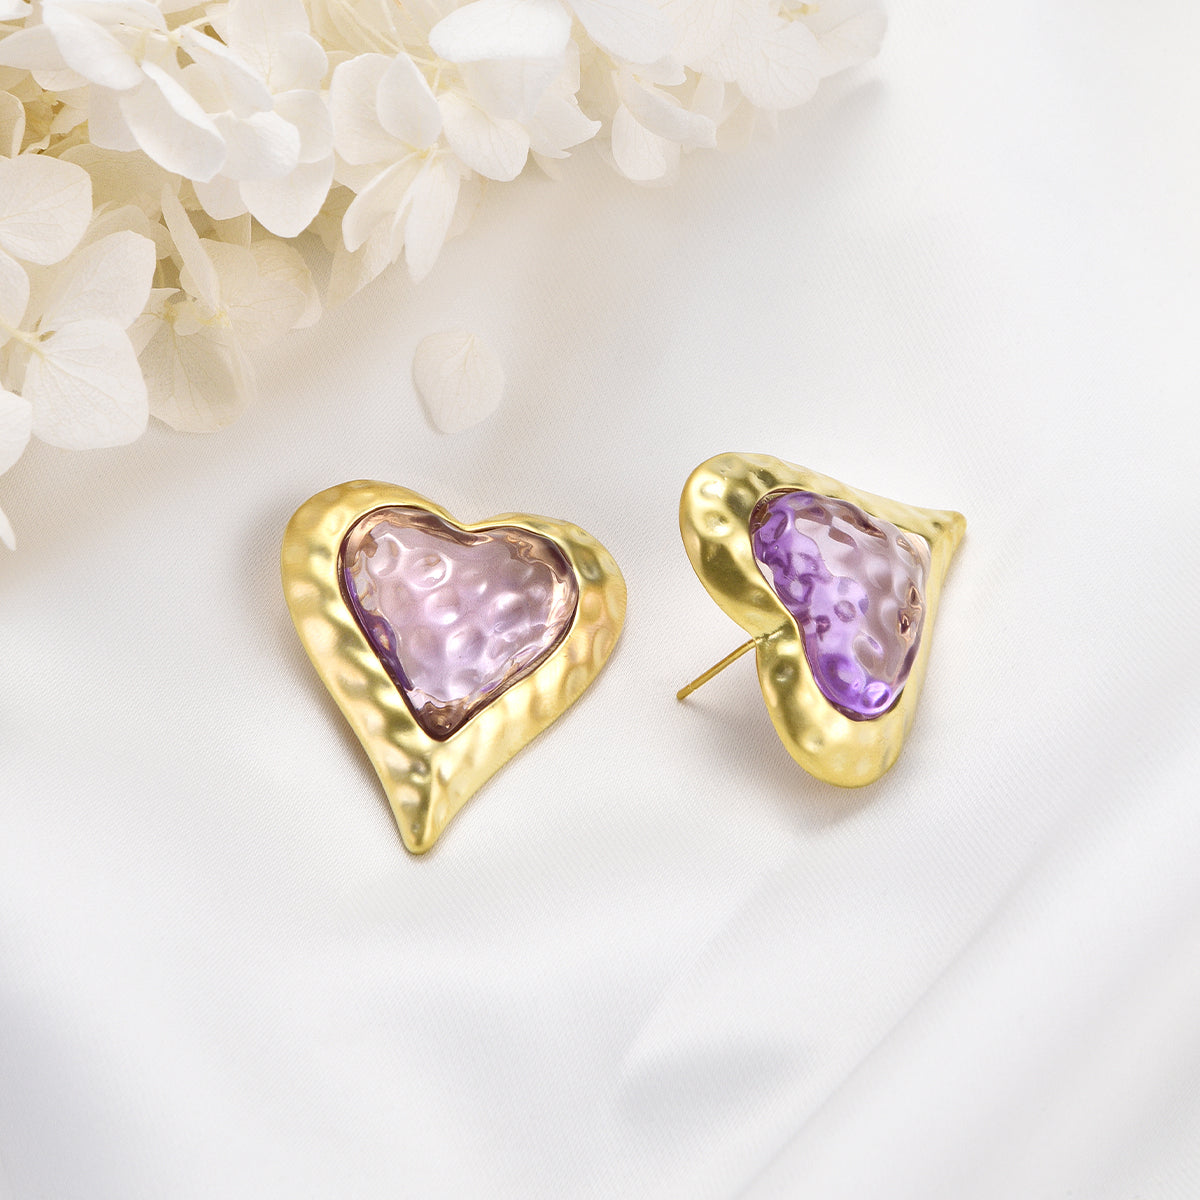 Cheerful pinkish earrings on golden heart shaped canvas